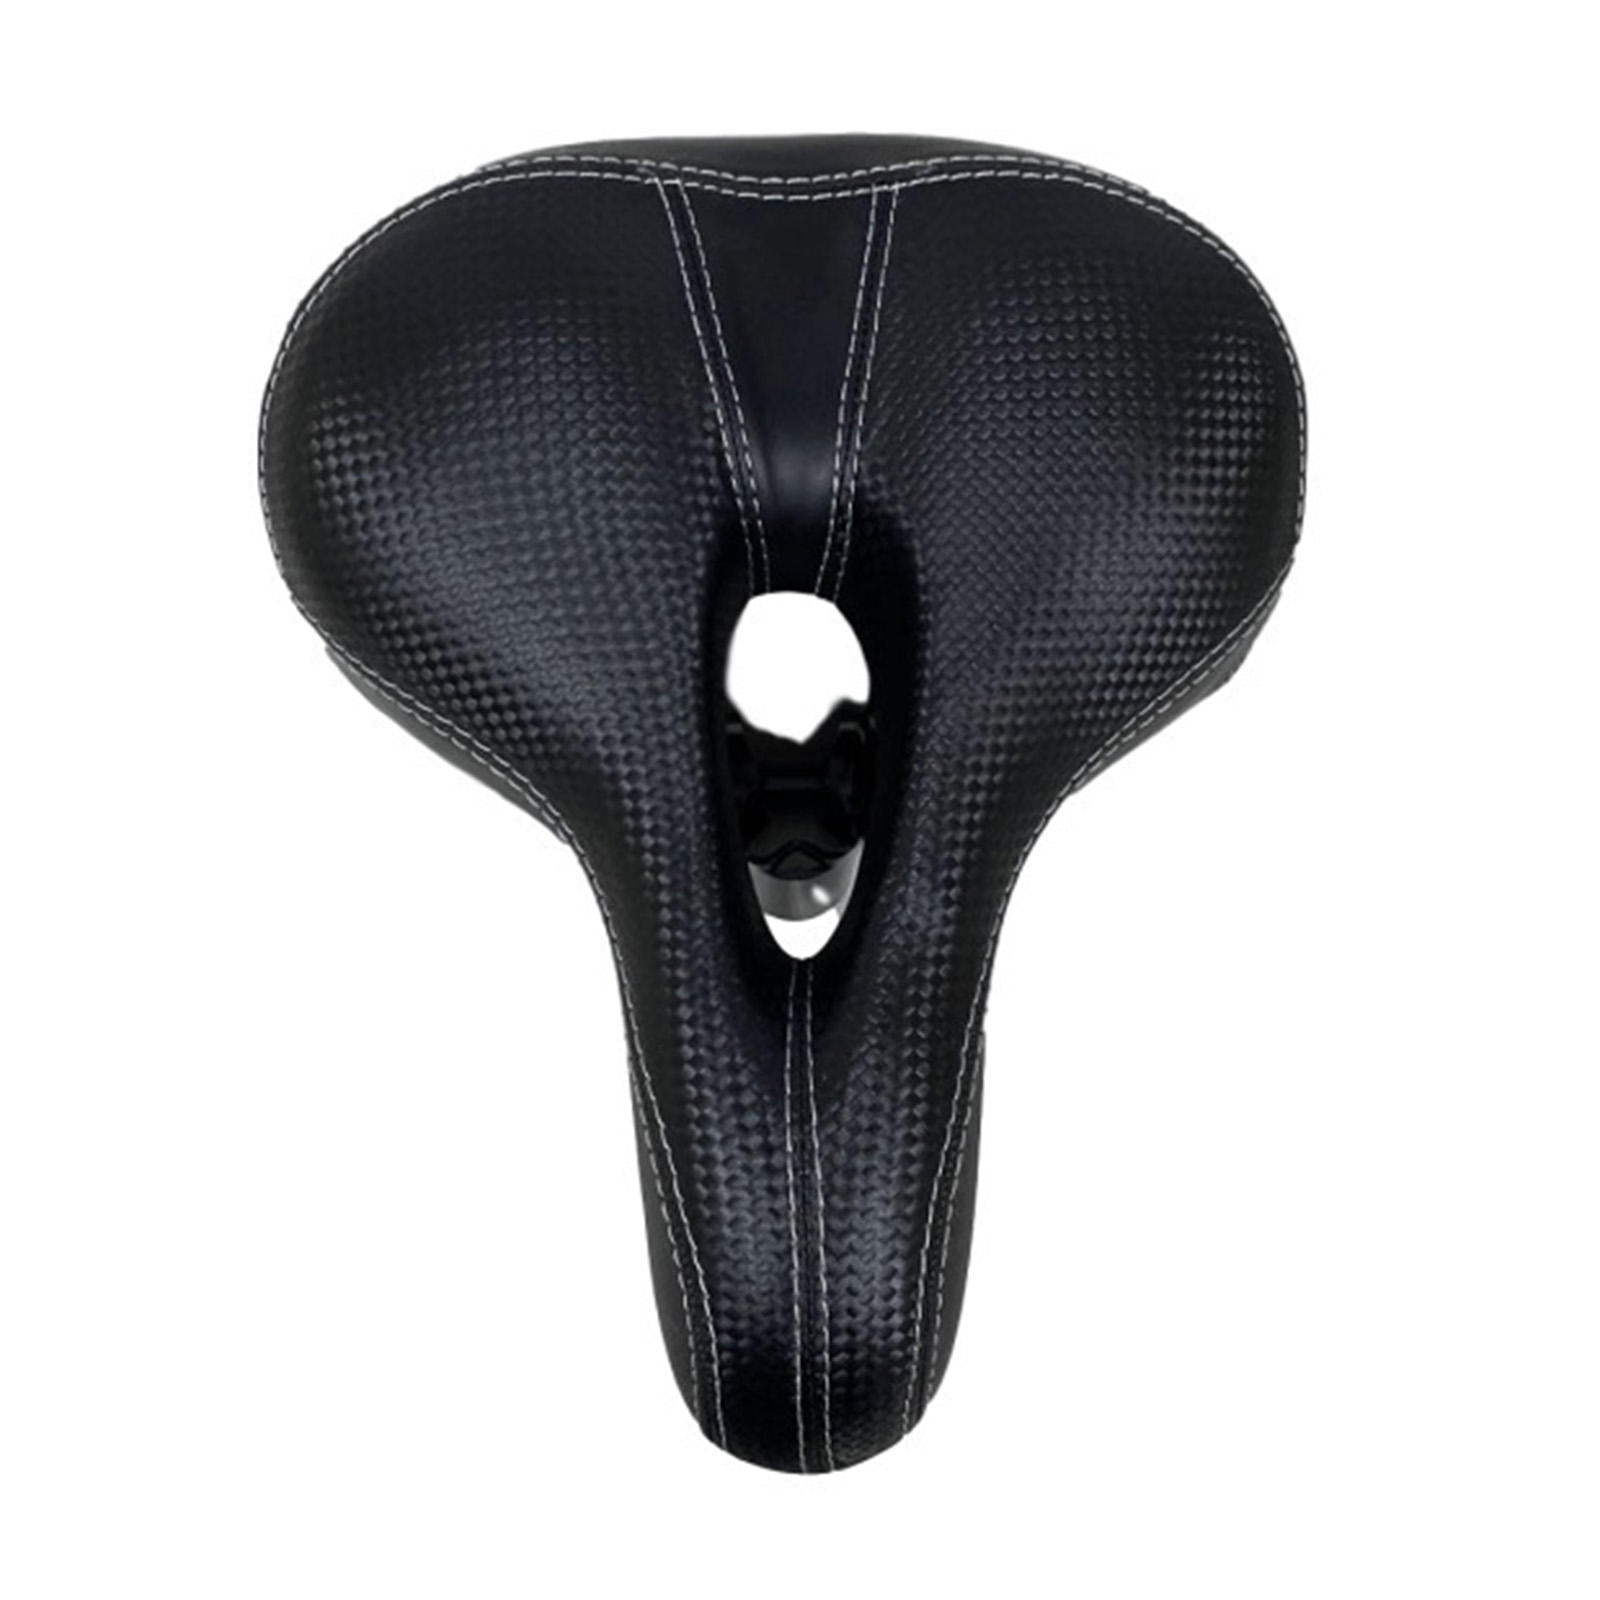 Comfortable Bike Seat - Soft Foam Padded Wide Leather Bicycle Saddle Cushion for